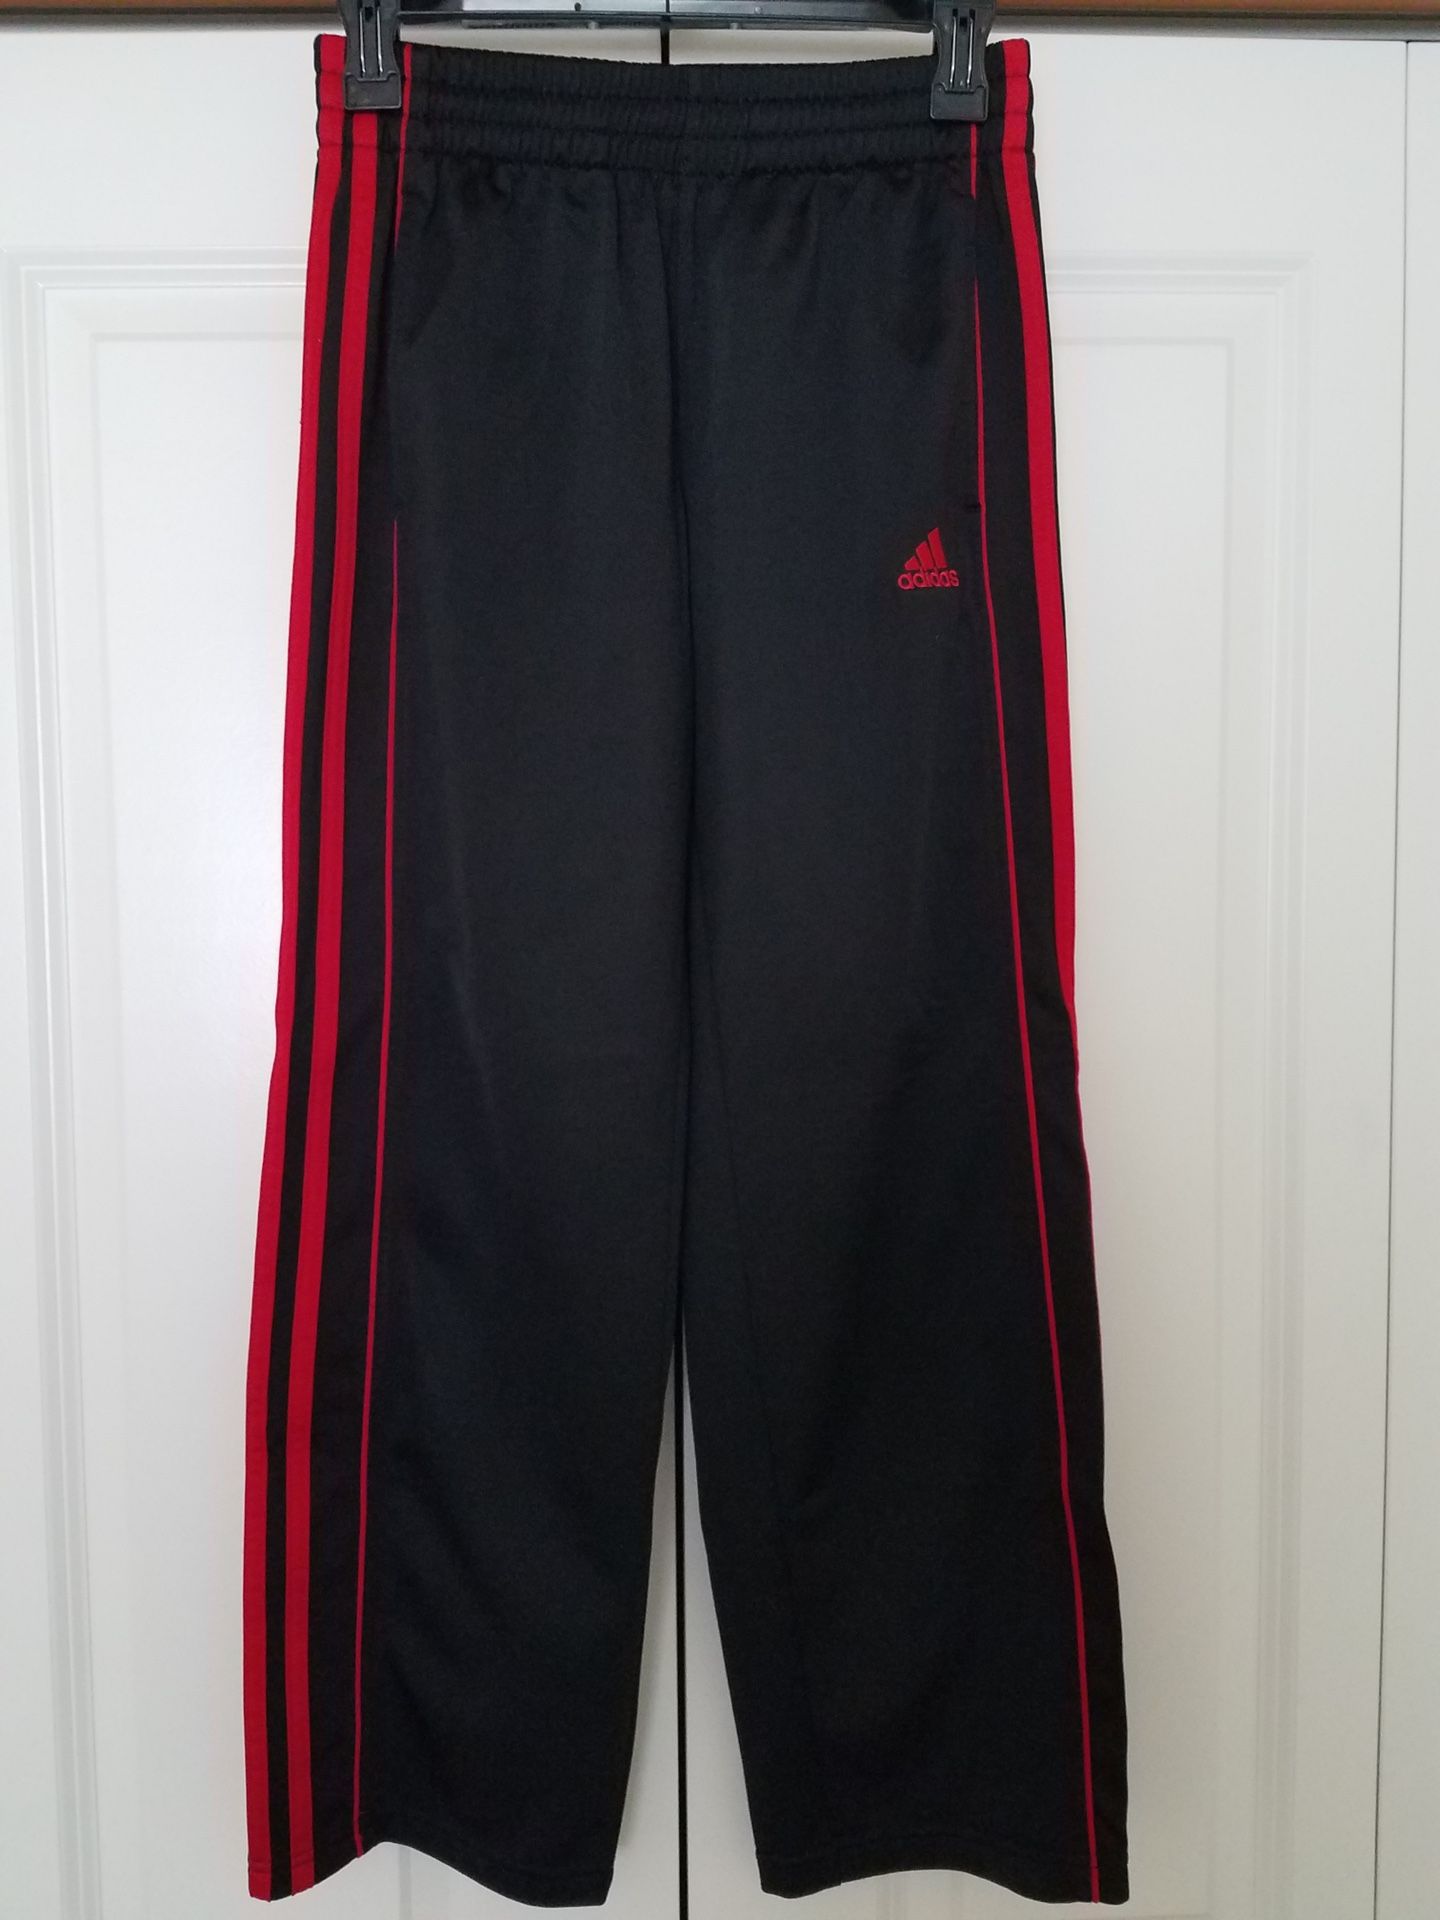 Brand New. Adidas Joggers, Boys Size 10-12.  See my other postings.